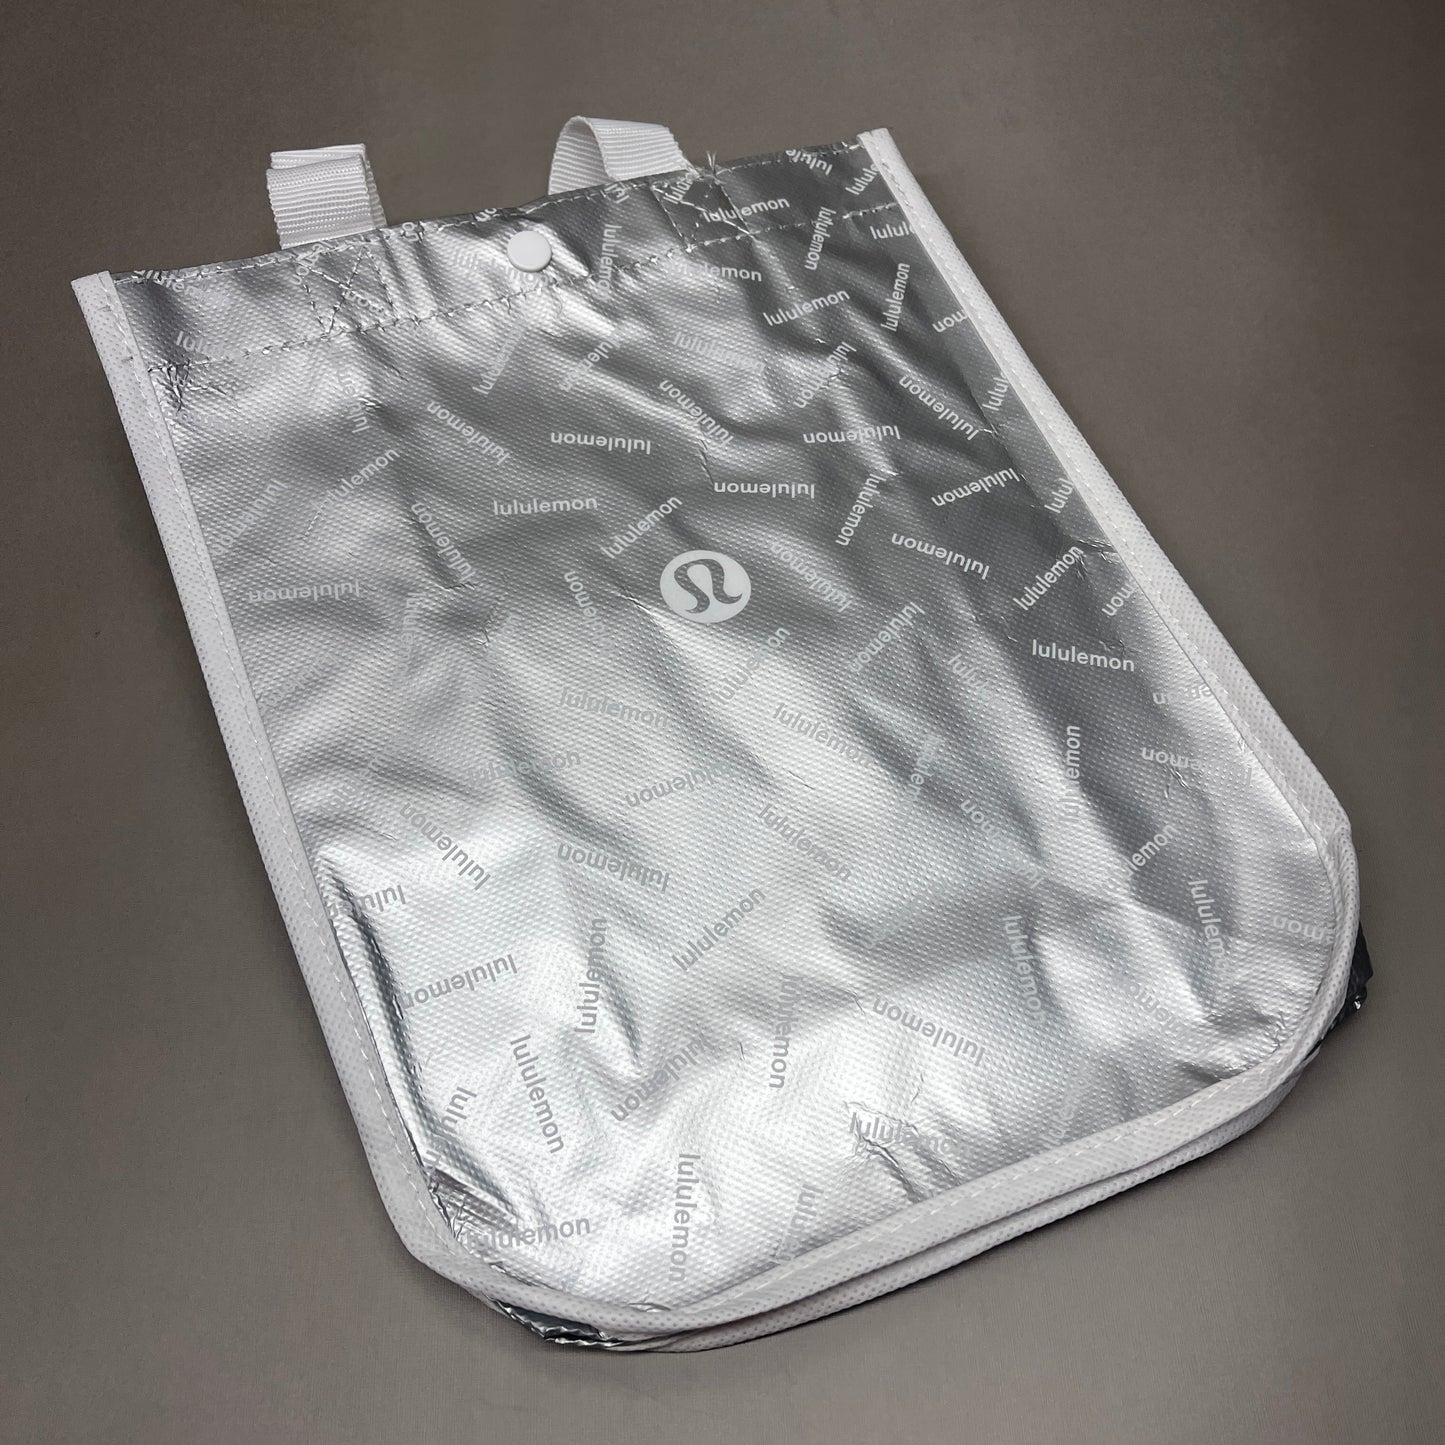 LULULEMON 3-PACK! Reusable Tote Shopping Bags Sz 9"W x 12"H x 4"D Silver (New)